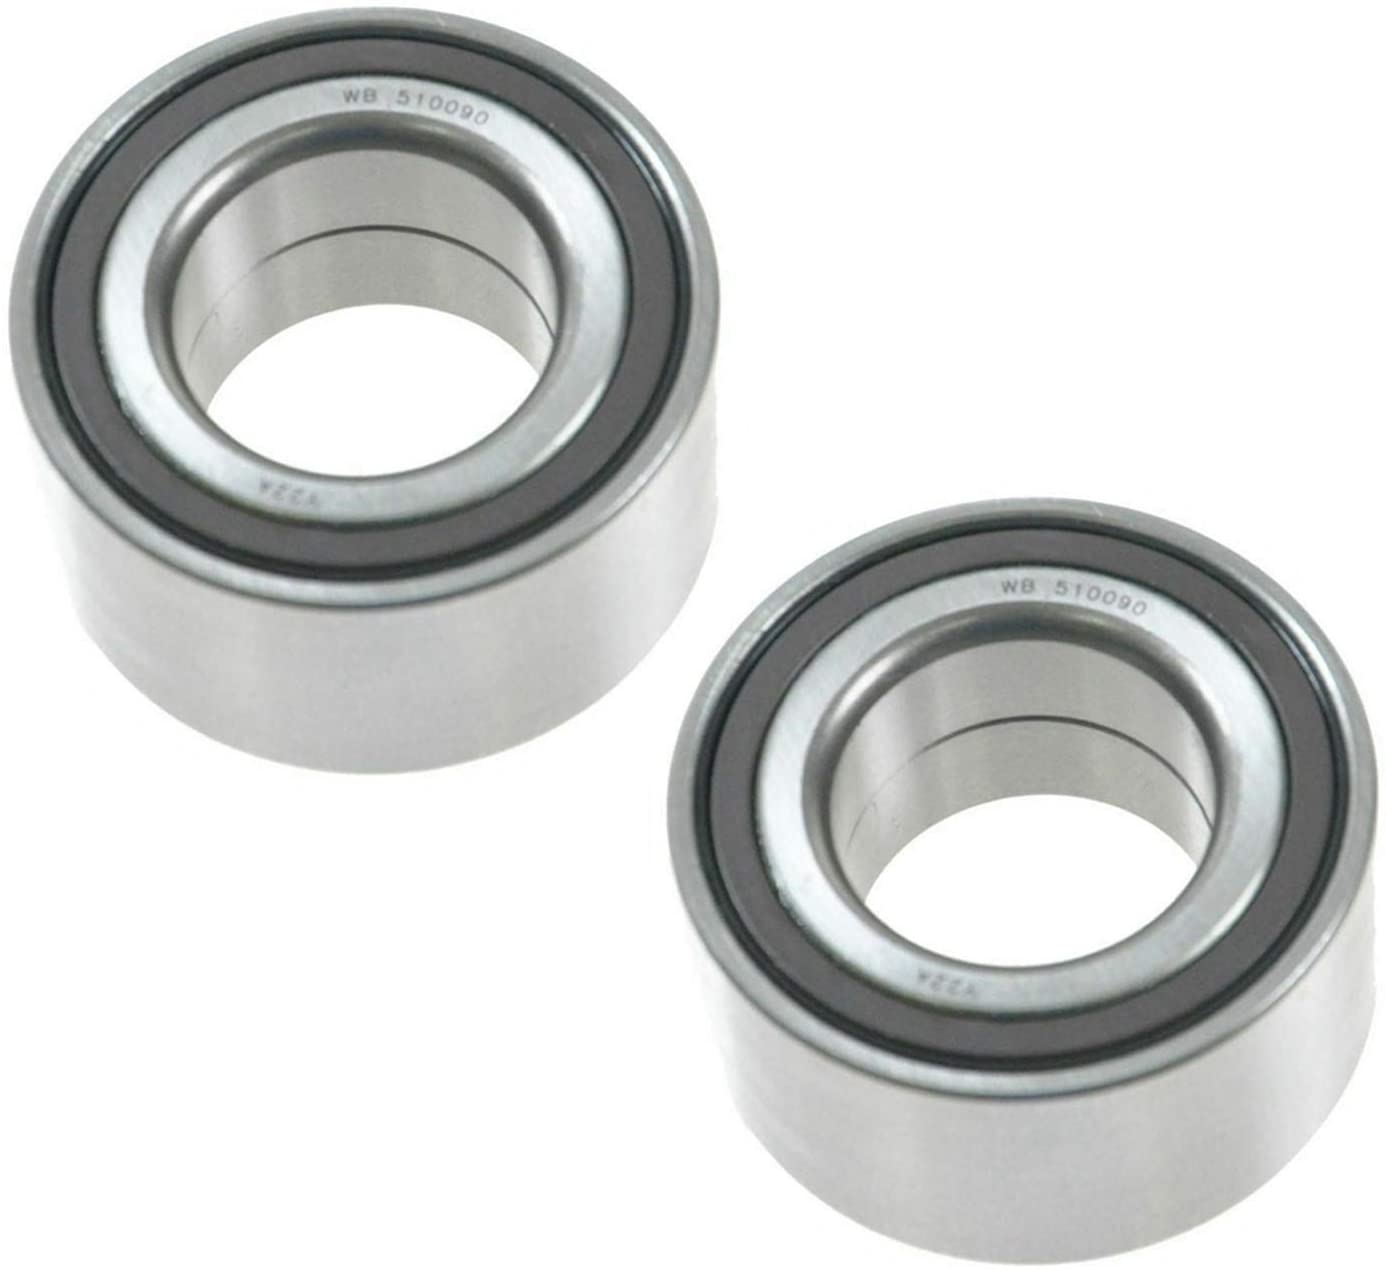 2x Front Wheel Bearing for 2007 2008 2009 2010-2017 Jeep Compass Patriot Caliber | eBay 2015 Jeep Patriot Front Wheel Bearing Replacement